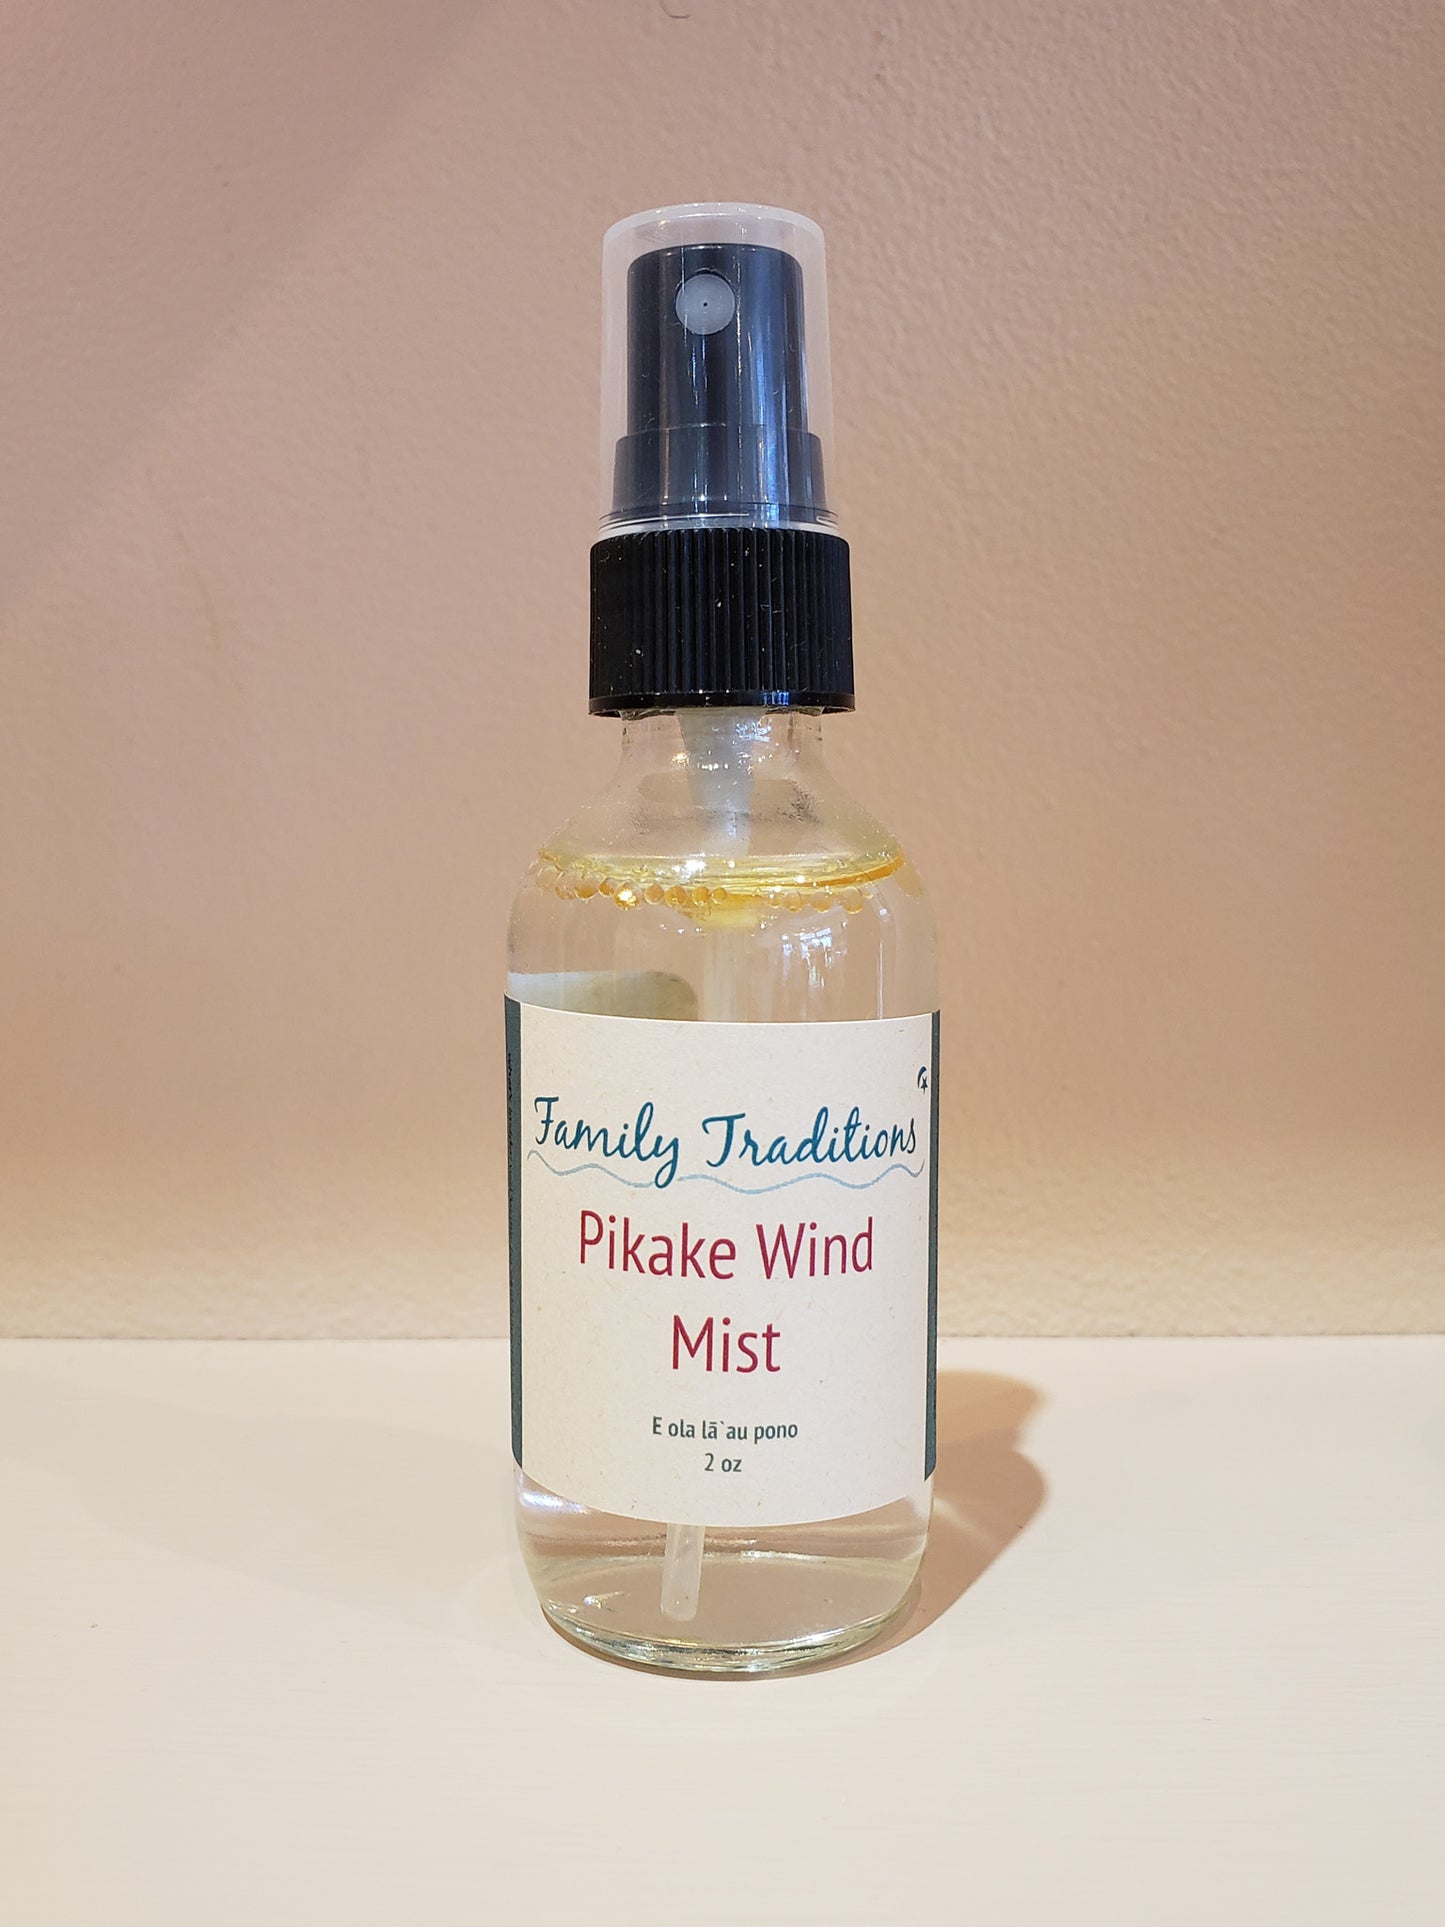 Family Traditions Mists